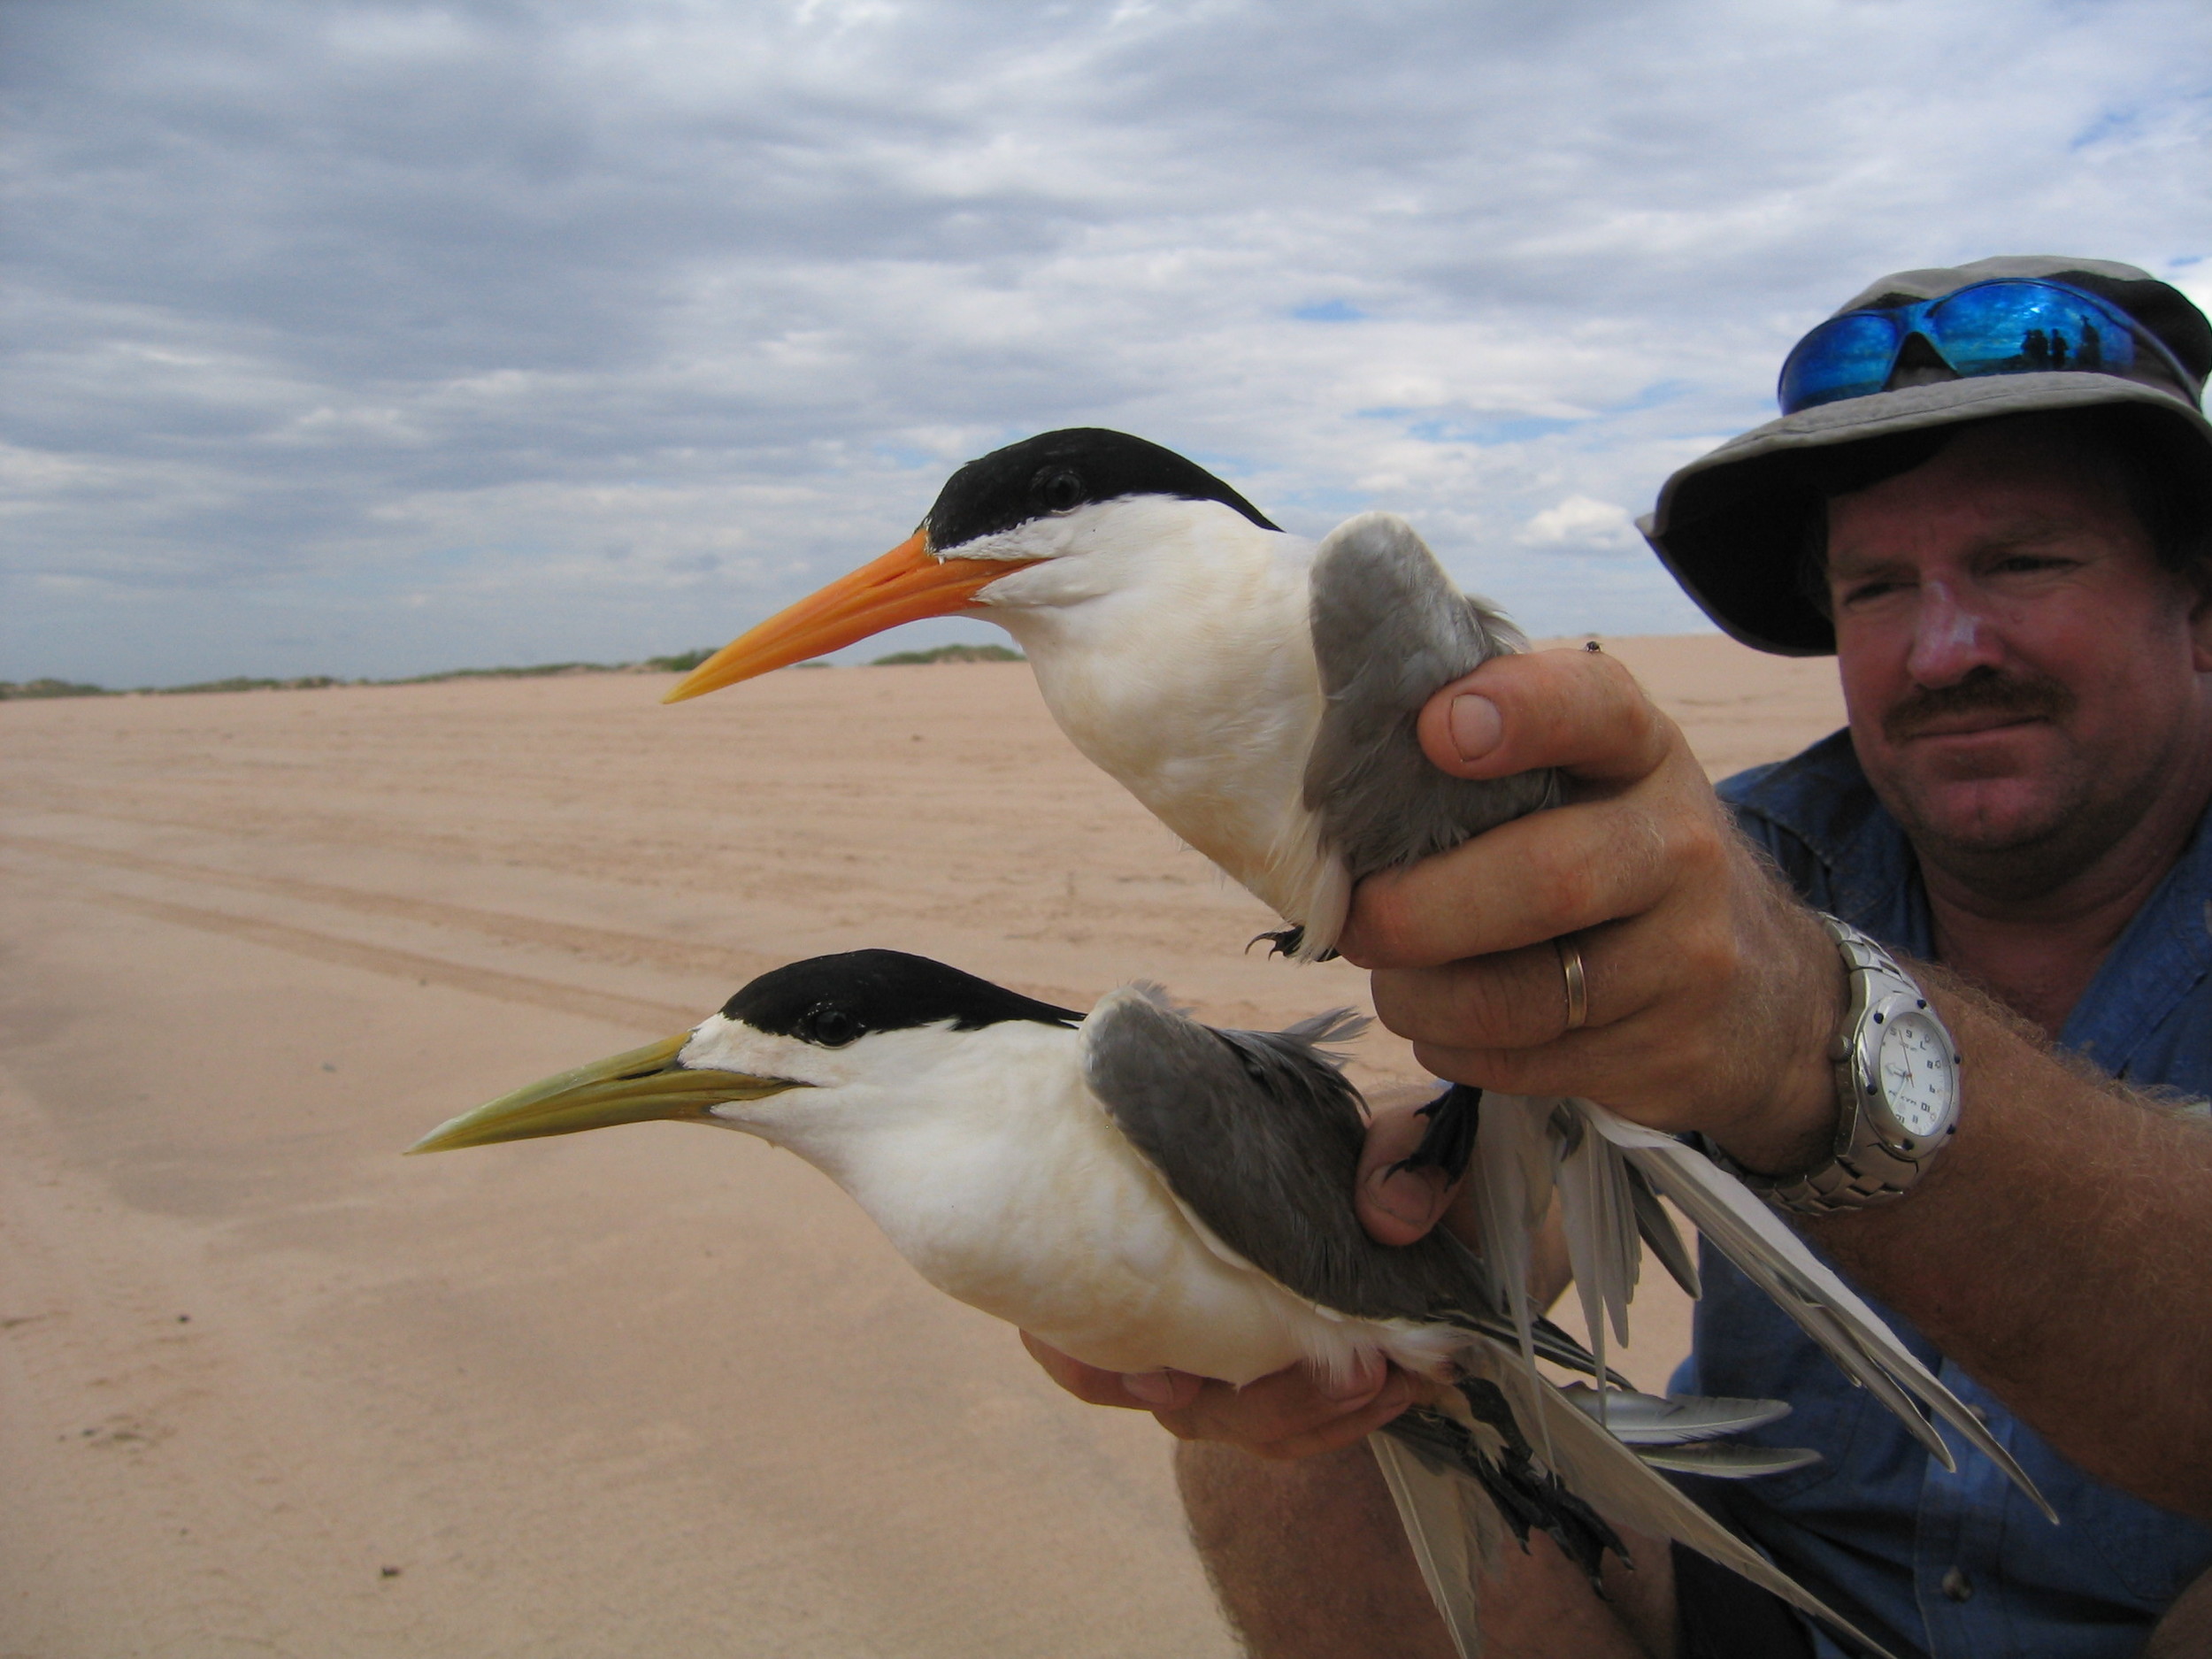  Grant compares the Lesser Crested Tern (top - bright orange bill) with the Greater Crested Tern (bottom - dull yellow bill). 